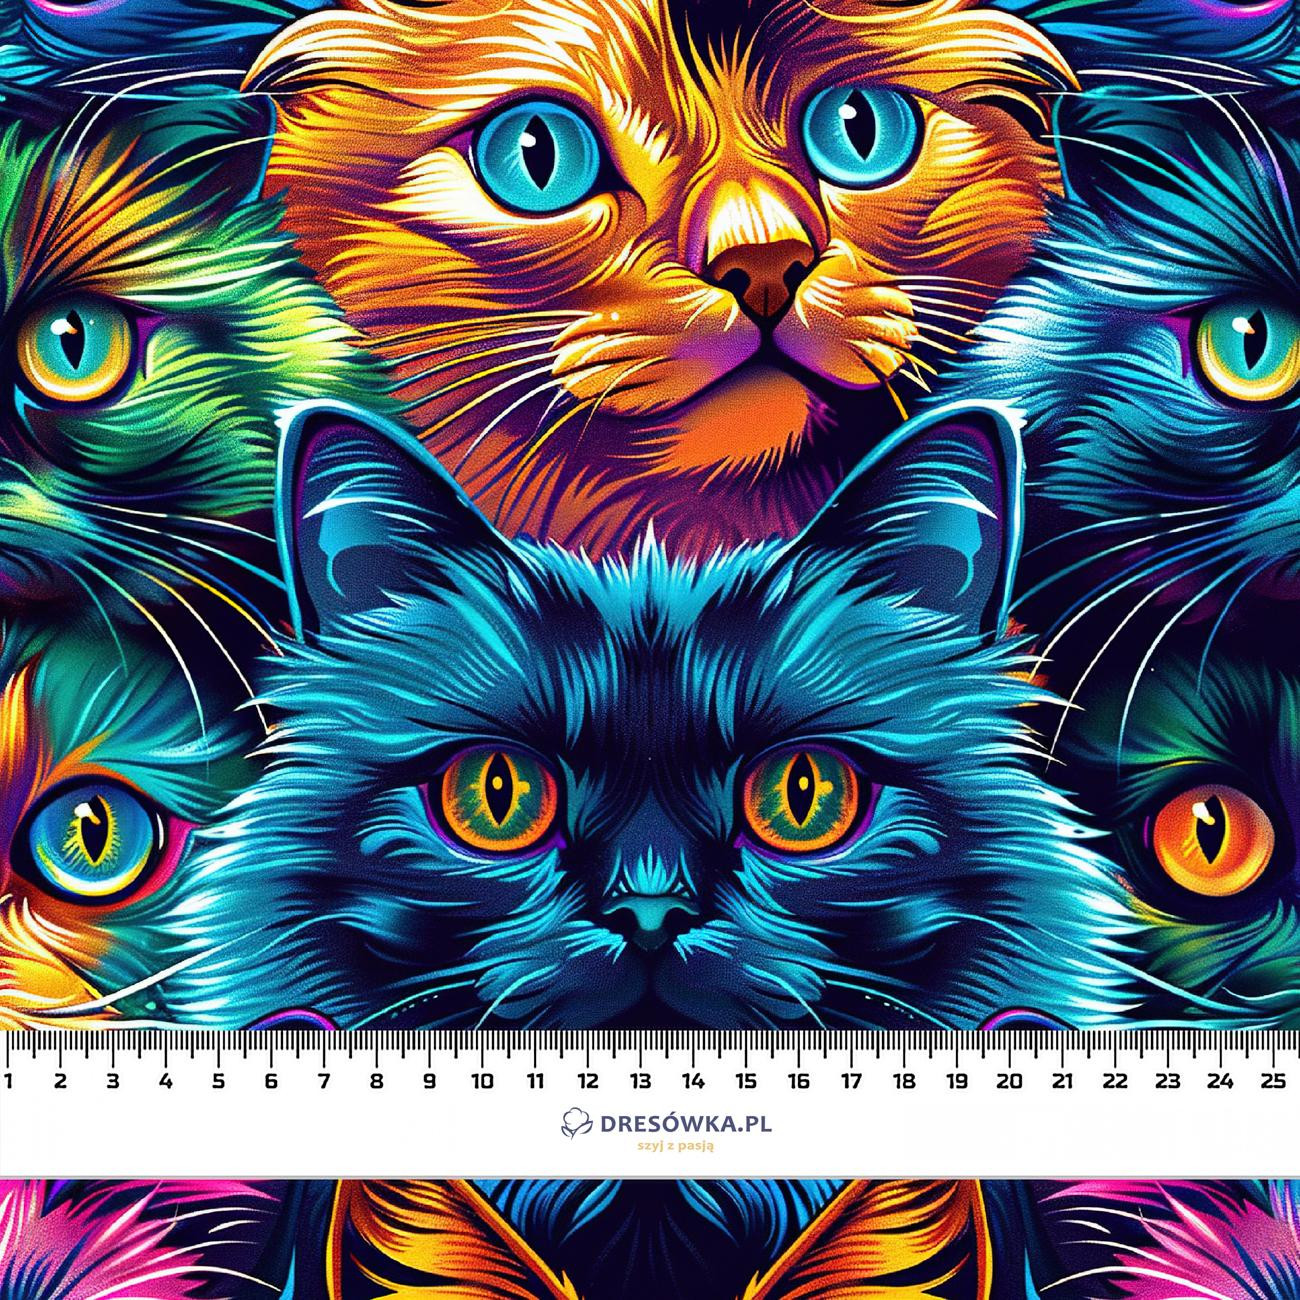 COLORFUL CATS - Thermo lycra